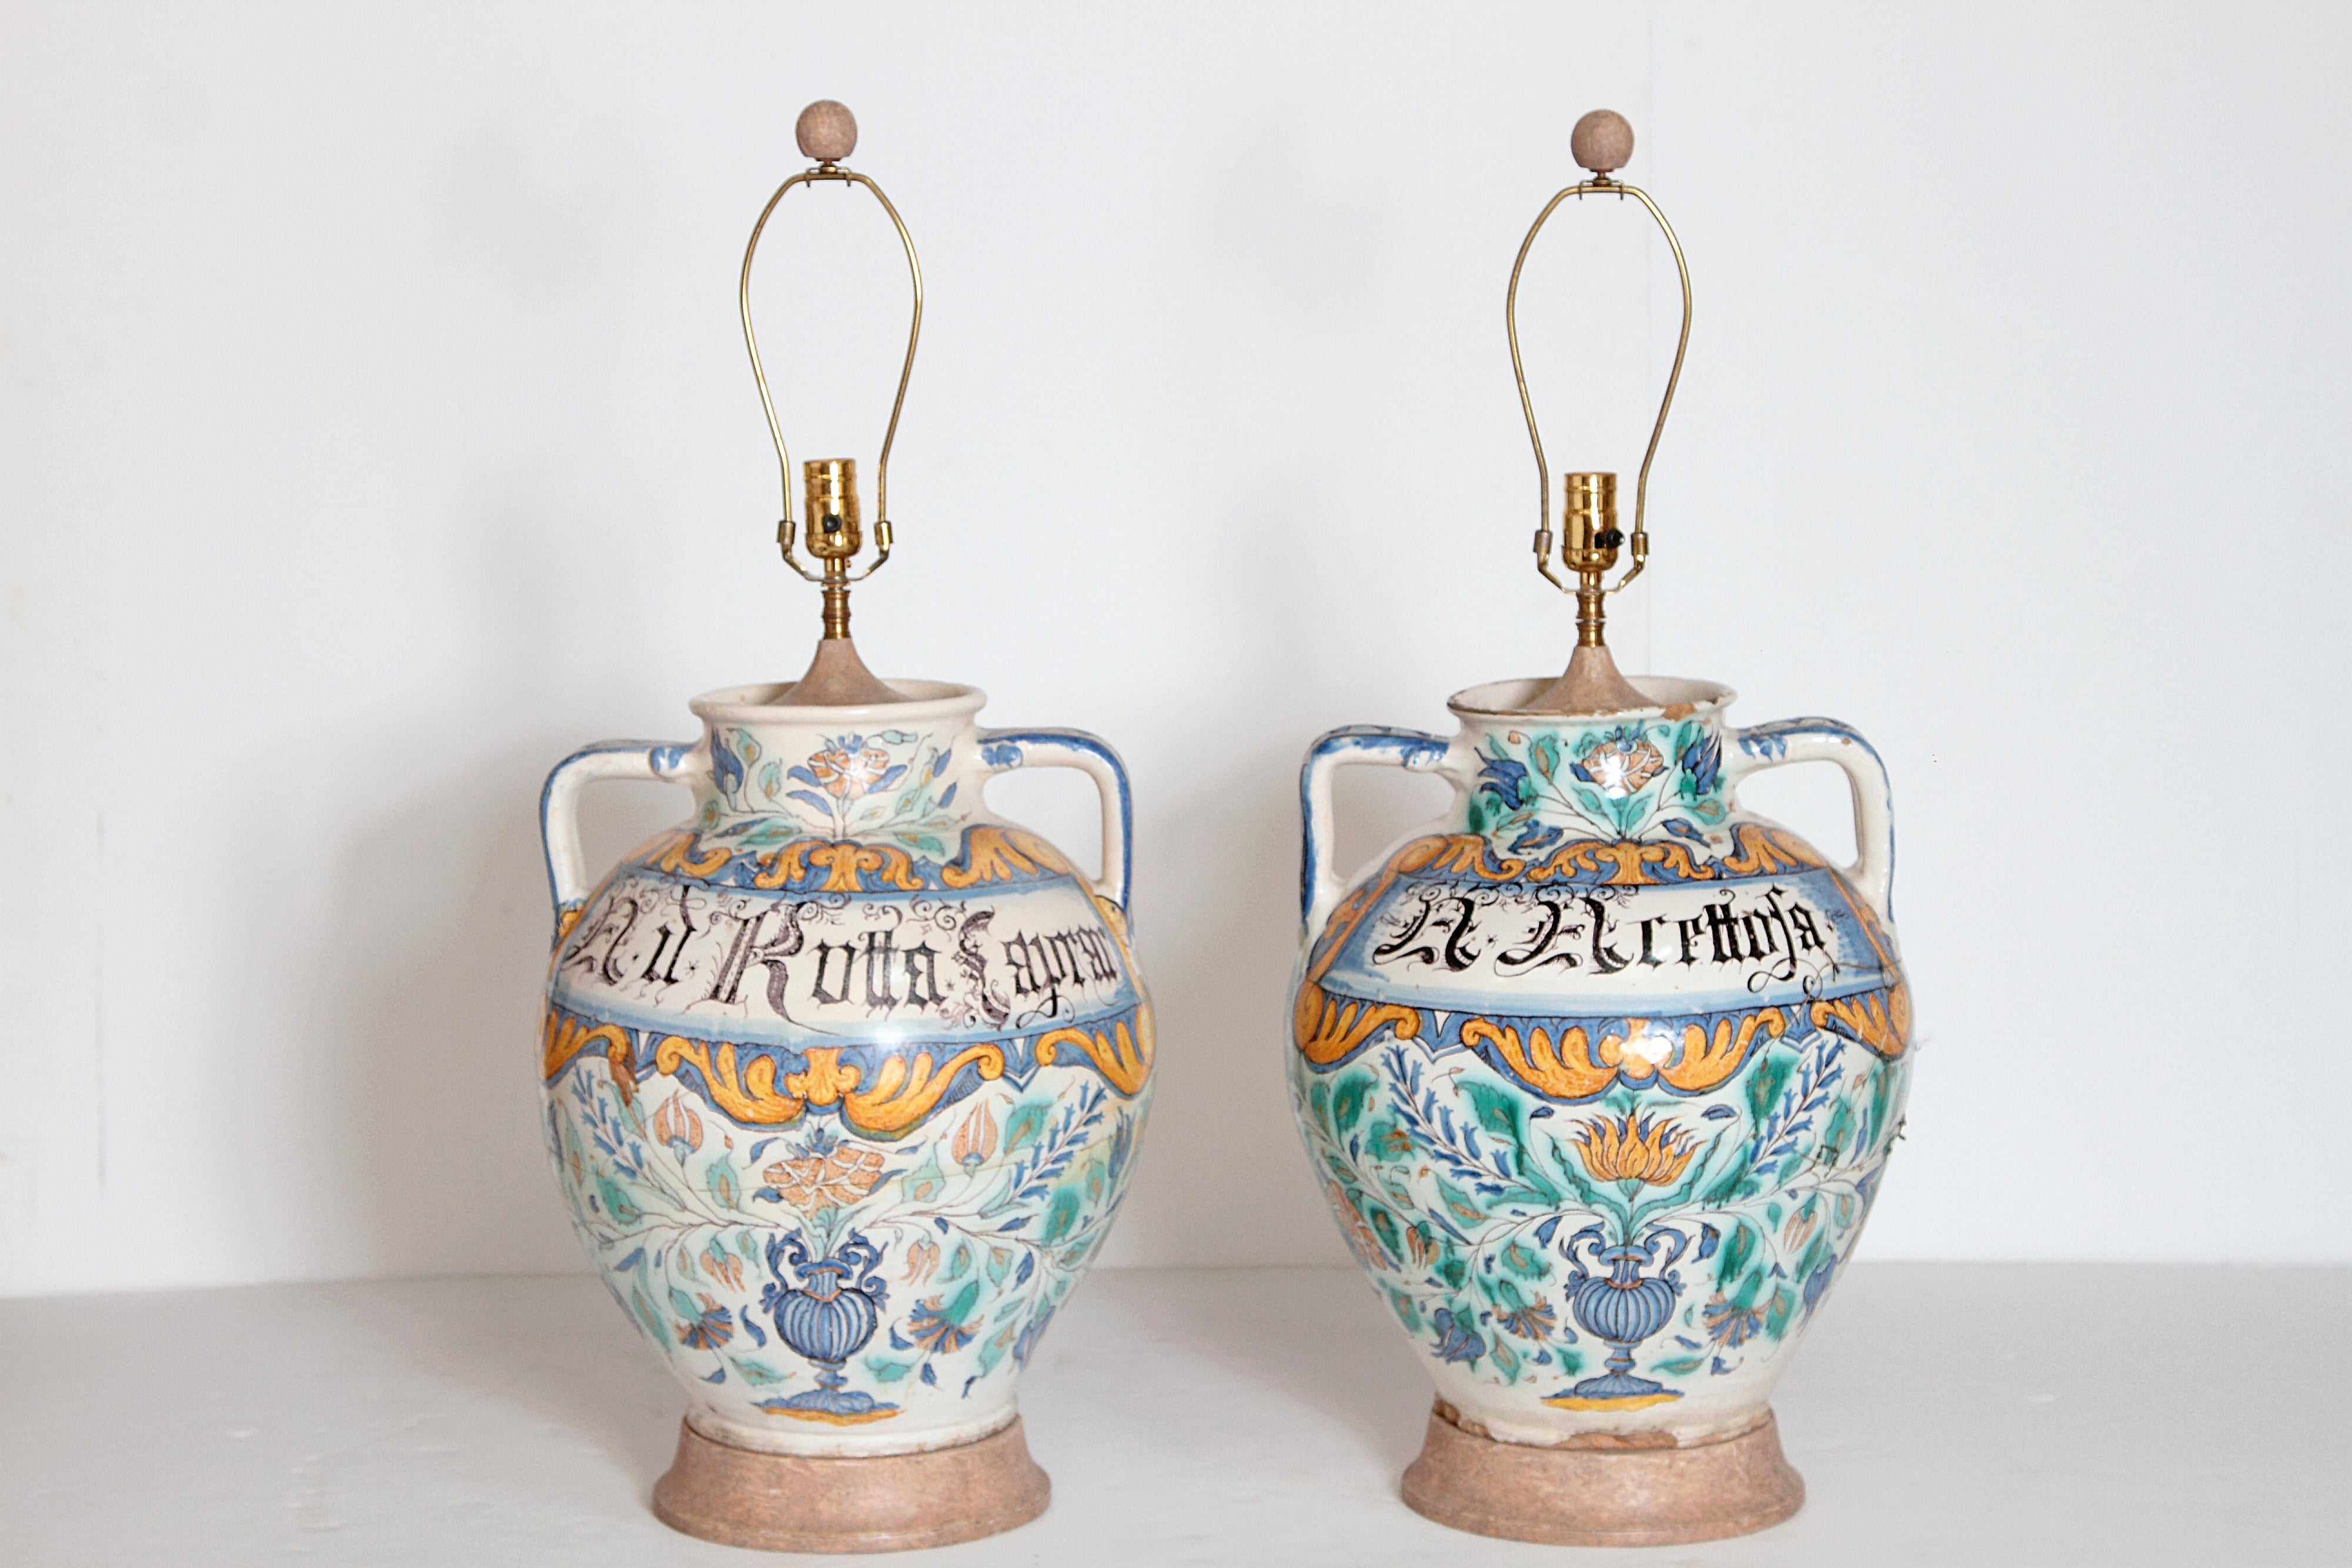 A Pair of Large 17th Century Italian Majolica Vases as Lamps